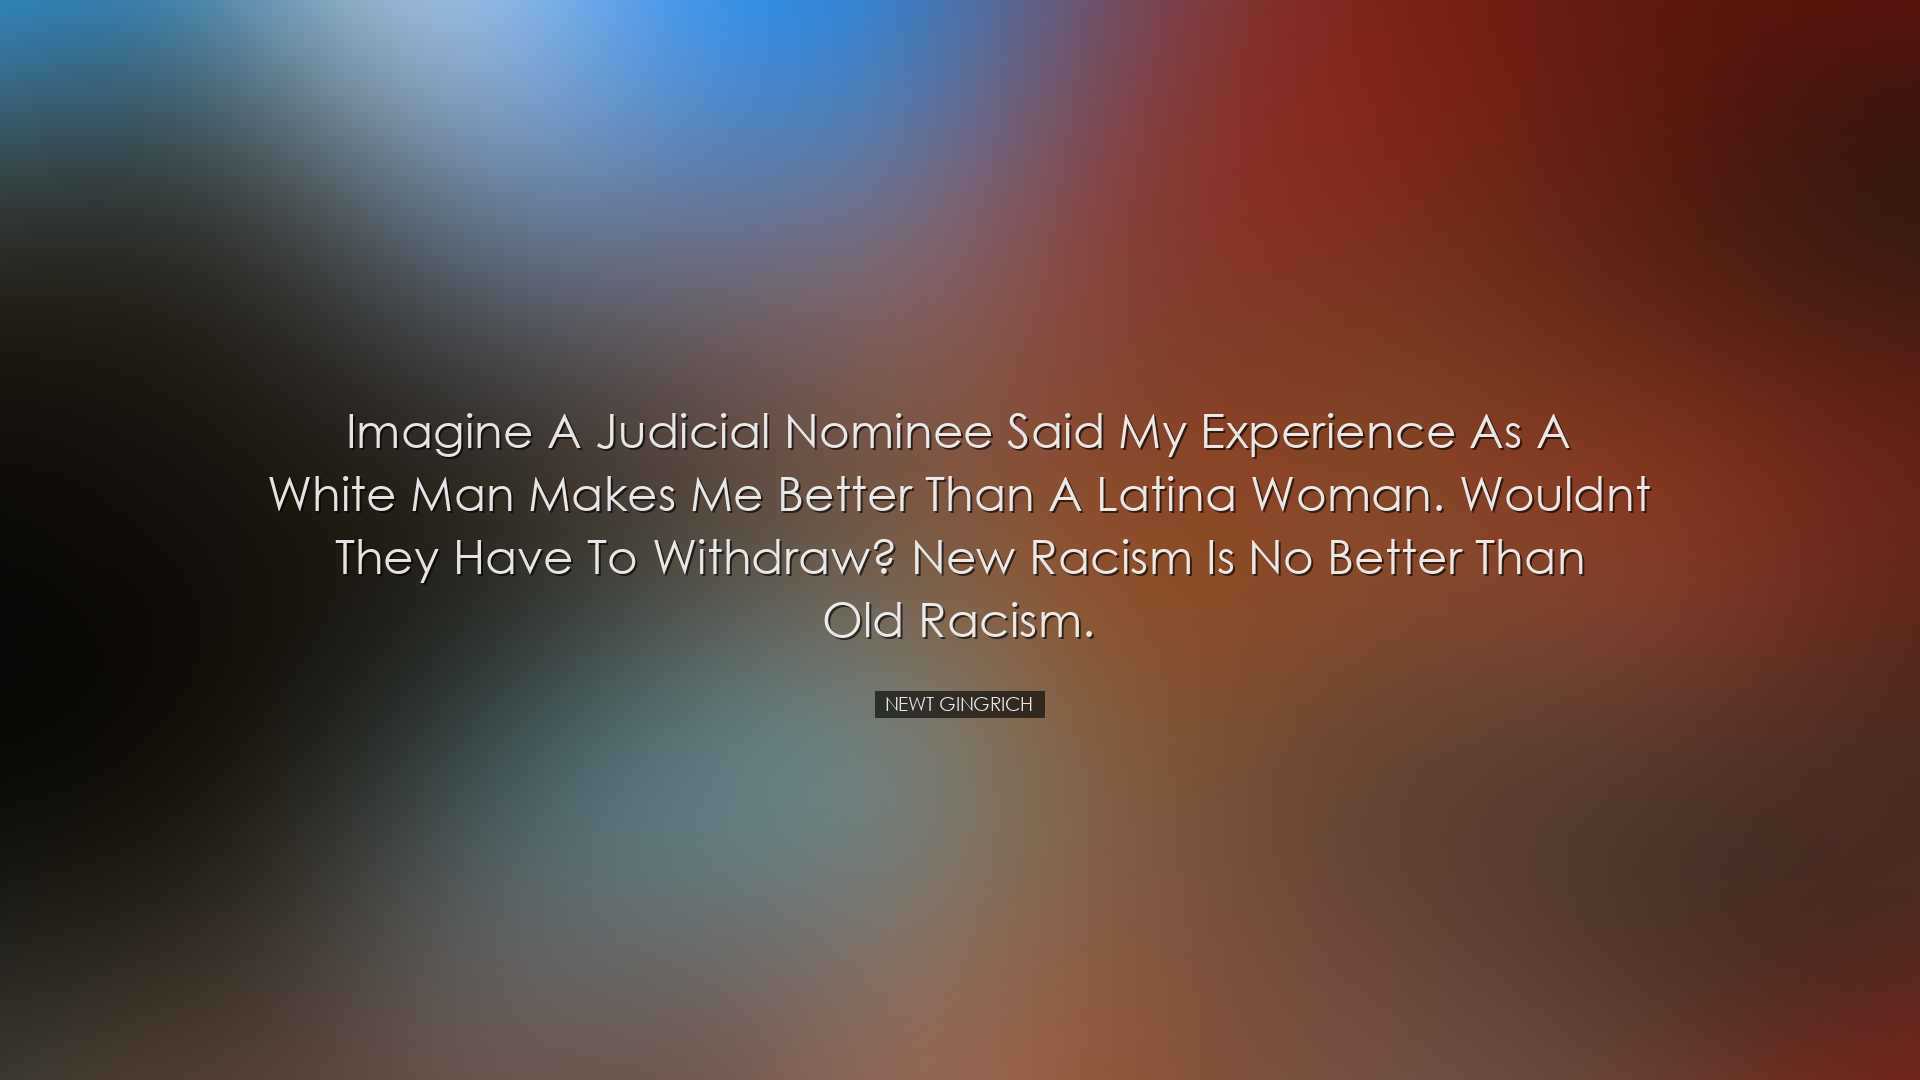 Imagine a judicial nominee said my experience as a white man makes